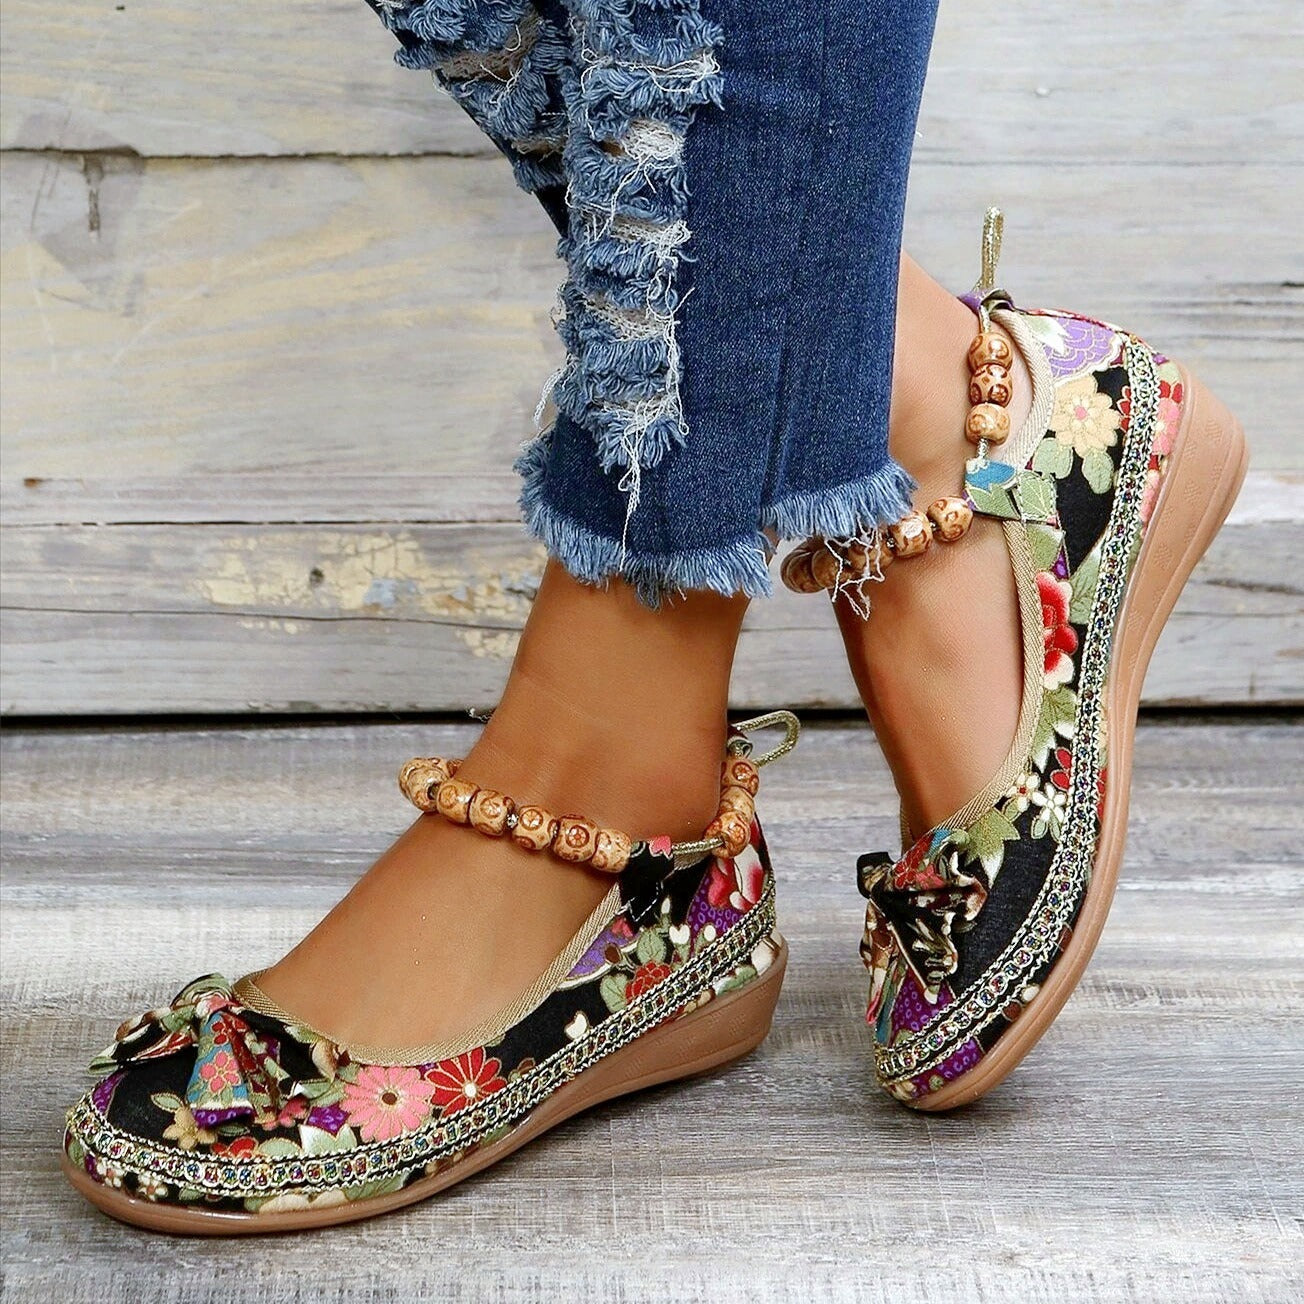 「binfenxie」Women's Stylish Floral Print Slip-Ons - Ethnic Ankle Strap Flat Shoes for Casual Walks